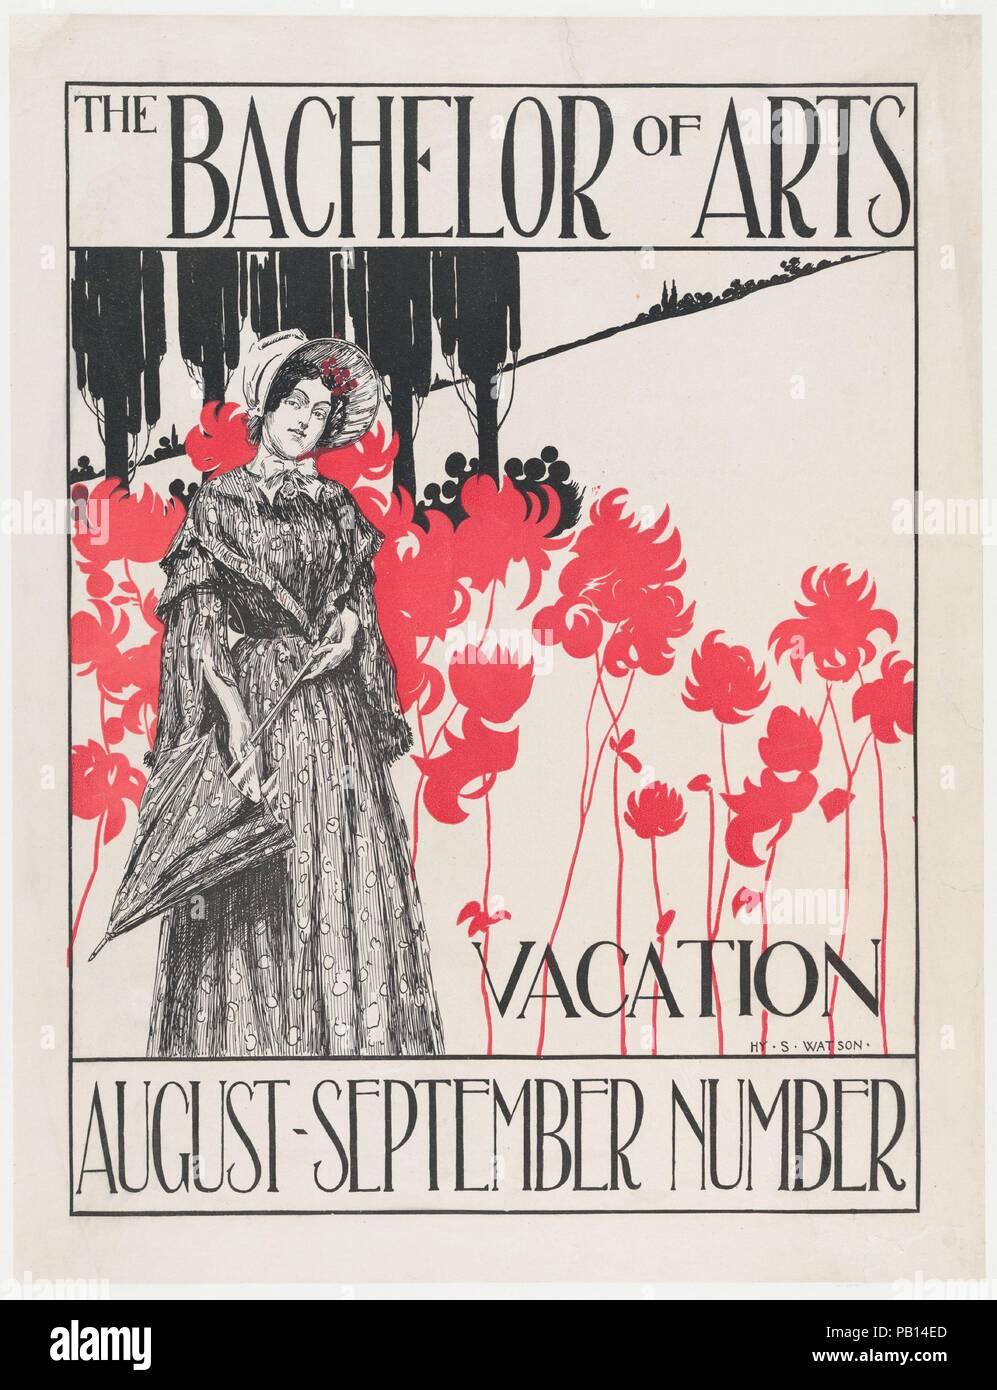 The Bachelor of Arts: Vacation, August-September No. Artist: Henry Sumner Watson (American, Bordentown, New Jersey 1868-1933). Dimensions: Sheet: 17 13/16 × 13 11/16 in. (45.3 × 34.8 cm)  Image: 15 7/8 × 11 15/16 in. (40.3 × 30.4 cm). Date: n.d.. Museum: Metropolitan Museum of Art, New York, USA. Stock Photo